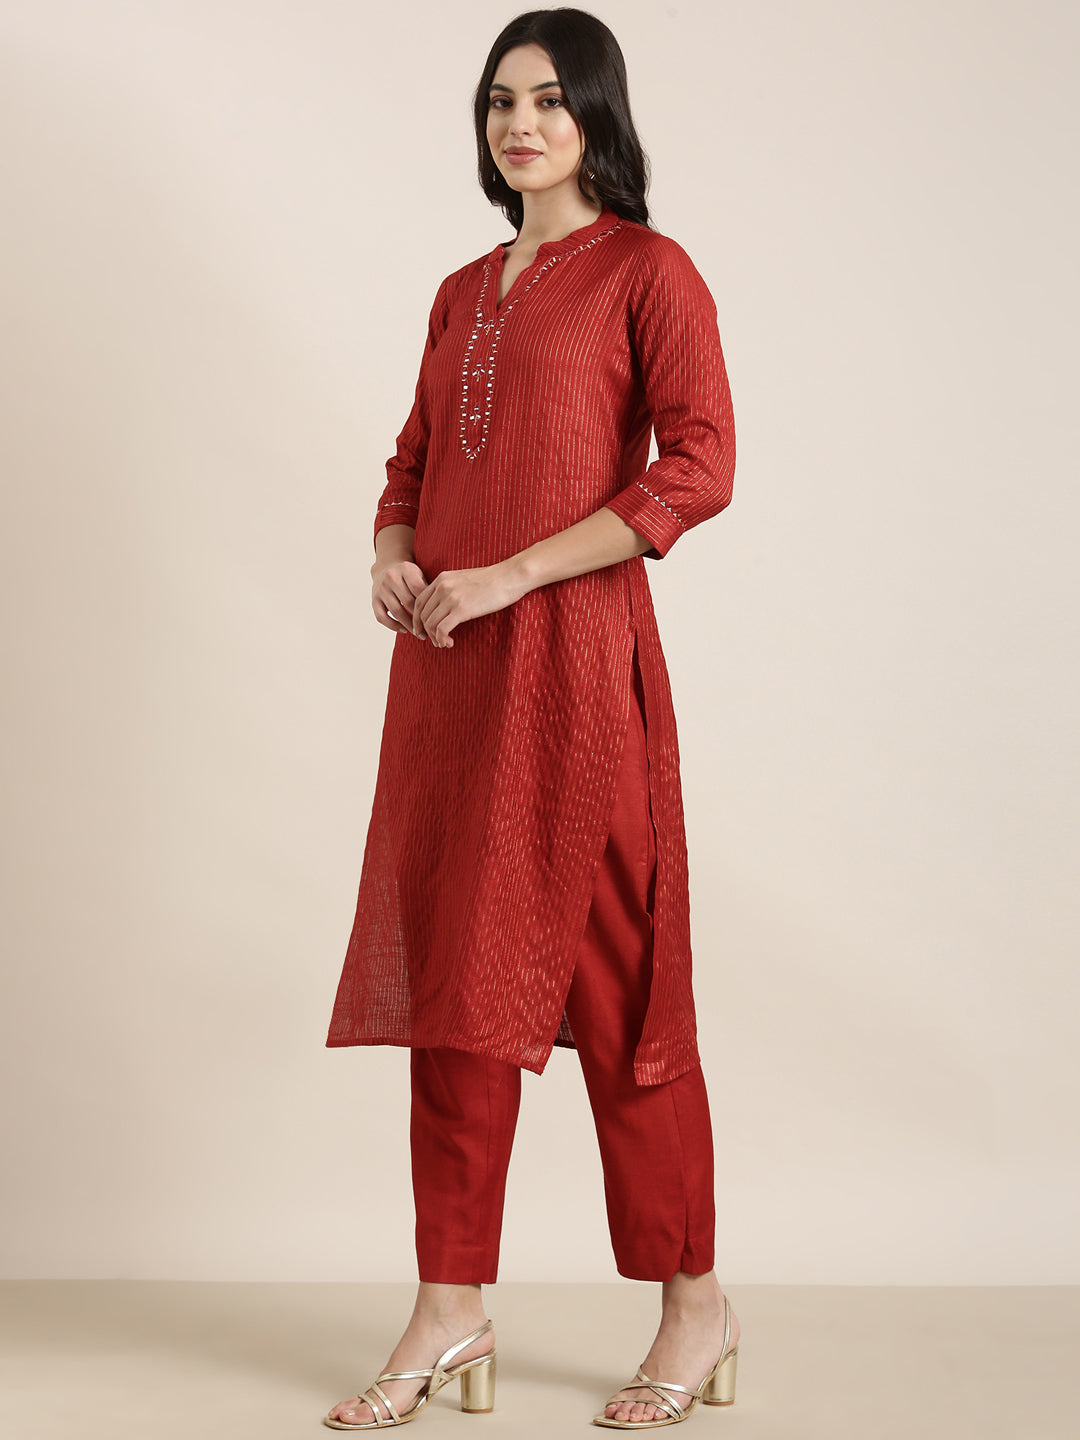 Women Straight Red Striped Kurta and Trousers Set Comes With Dupatta